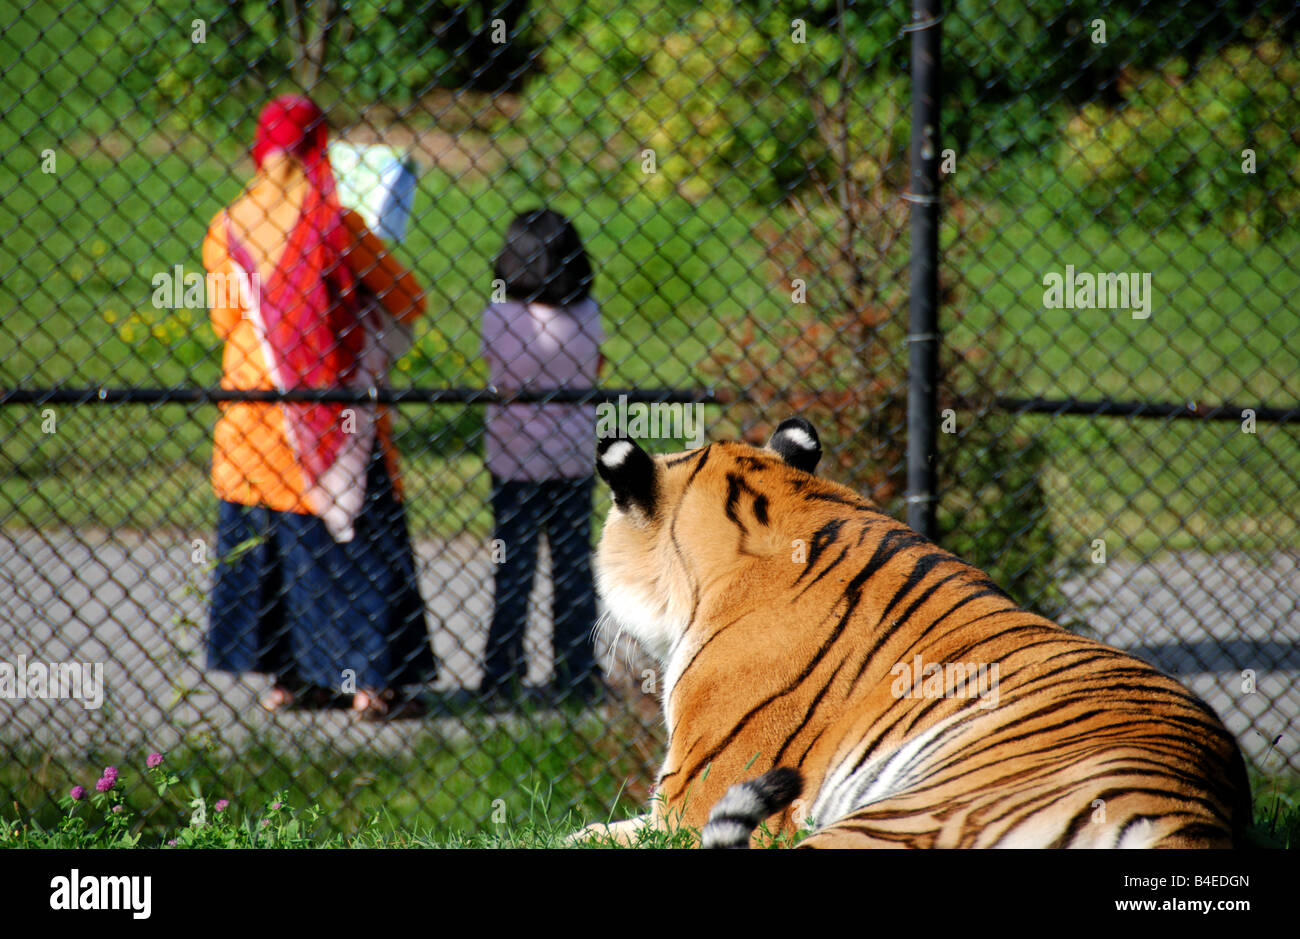 Two visitors study a map of the Toronto zoo while being watched by a Siberian tiger. Stock Photo